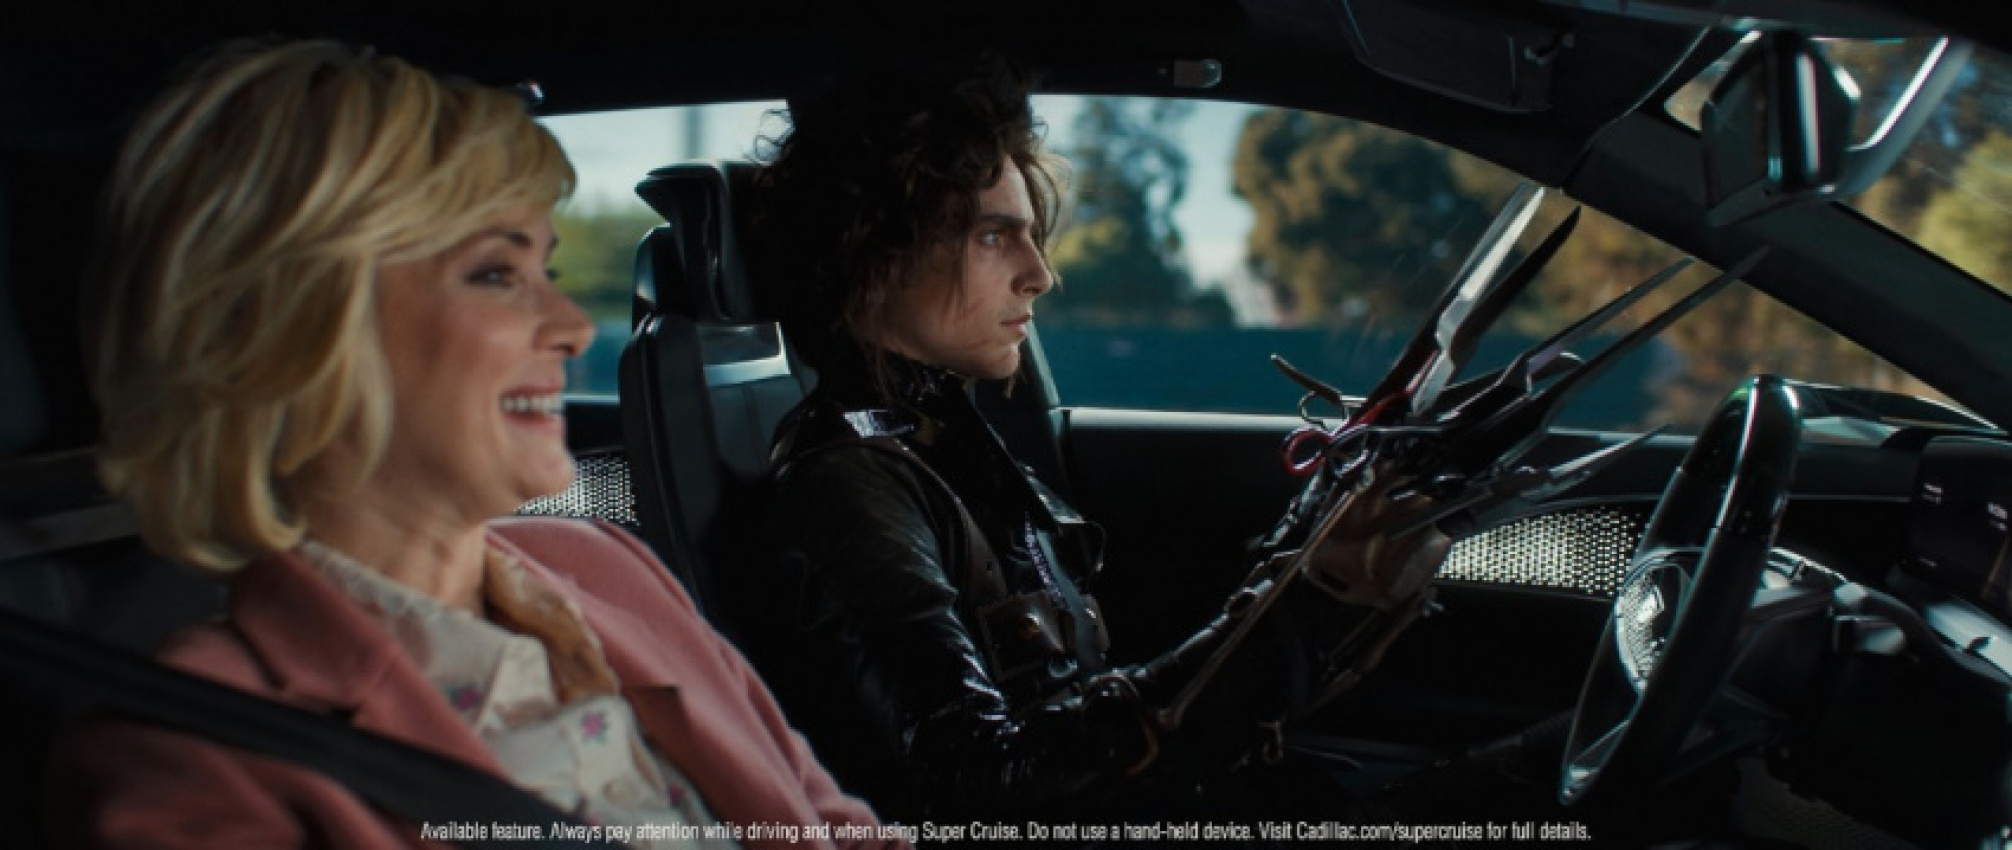 autos, cadillac, cars, electric cars, cadillac lyriq, general motors, super cruise, tim burton, timothée chalamet, winona ryder, cadillac shows off hands-free driver assistance technology in new super bowl ad